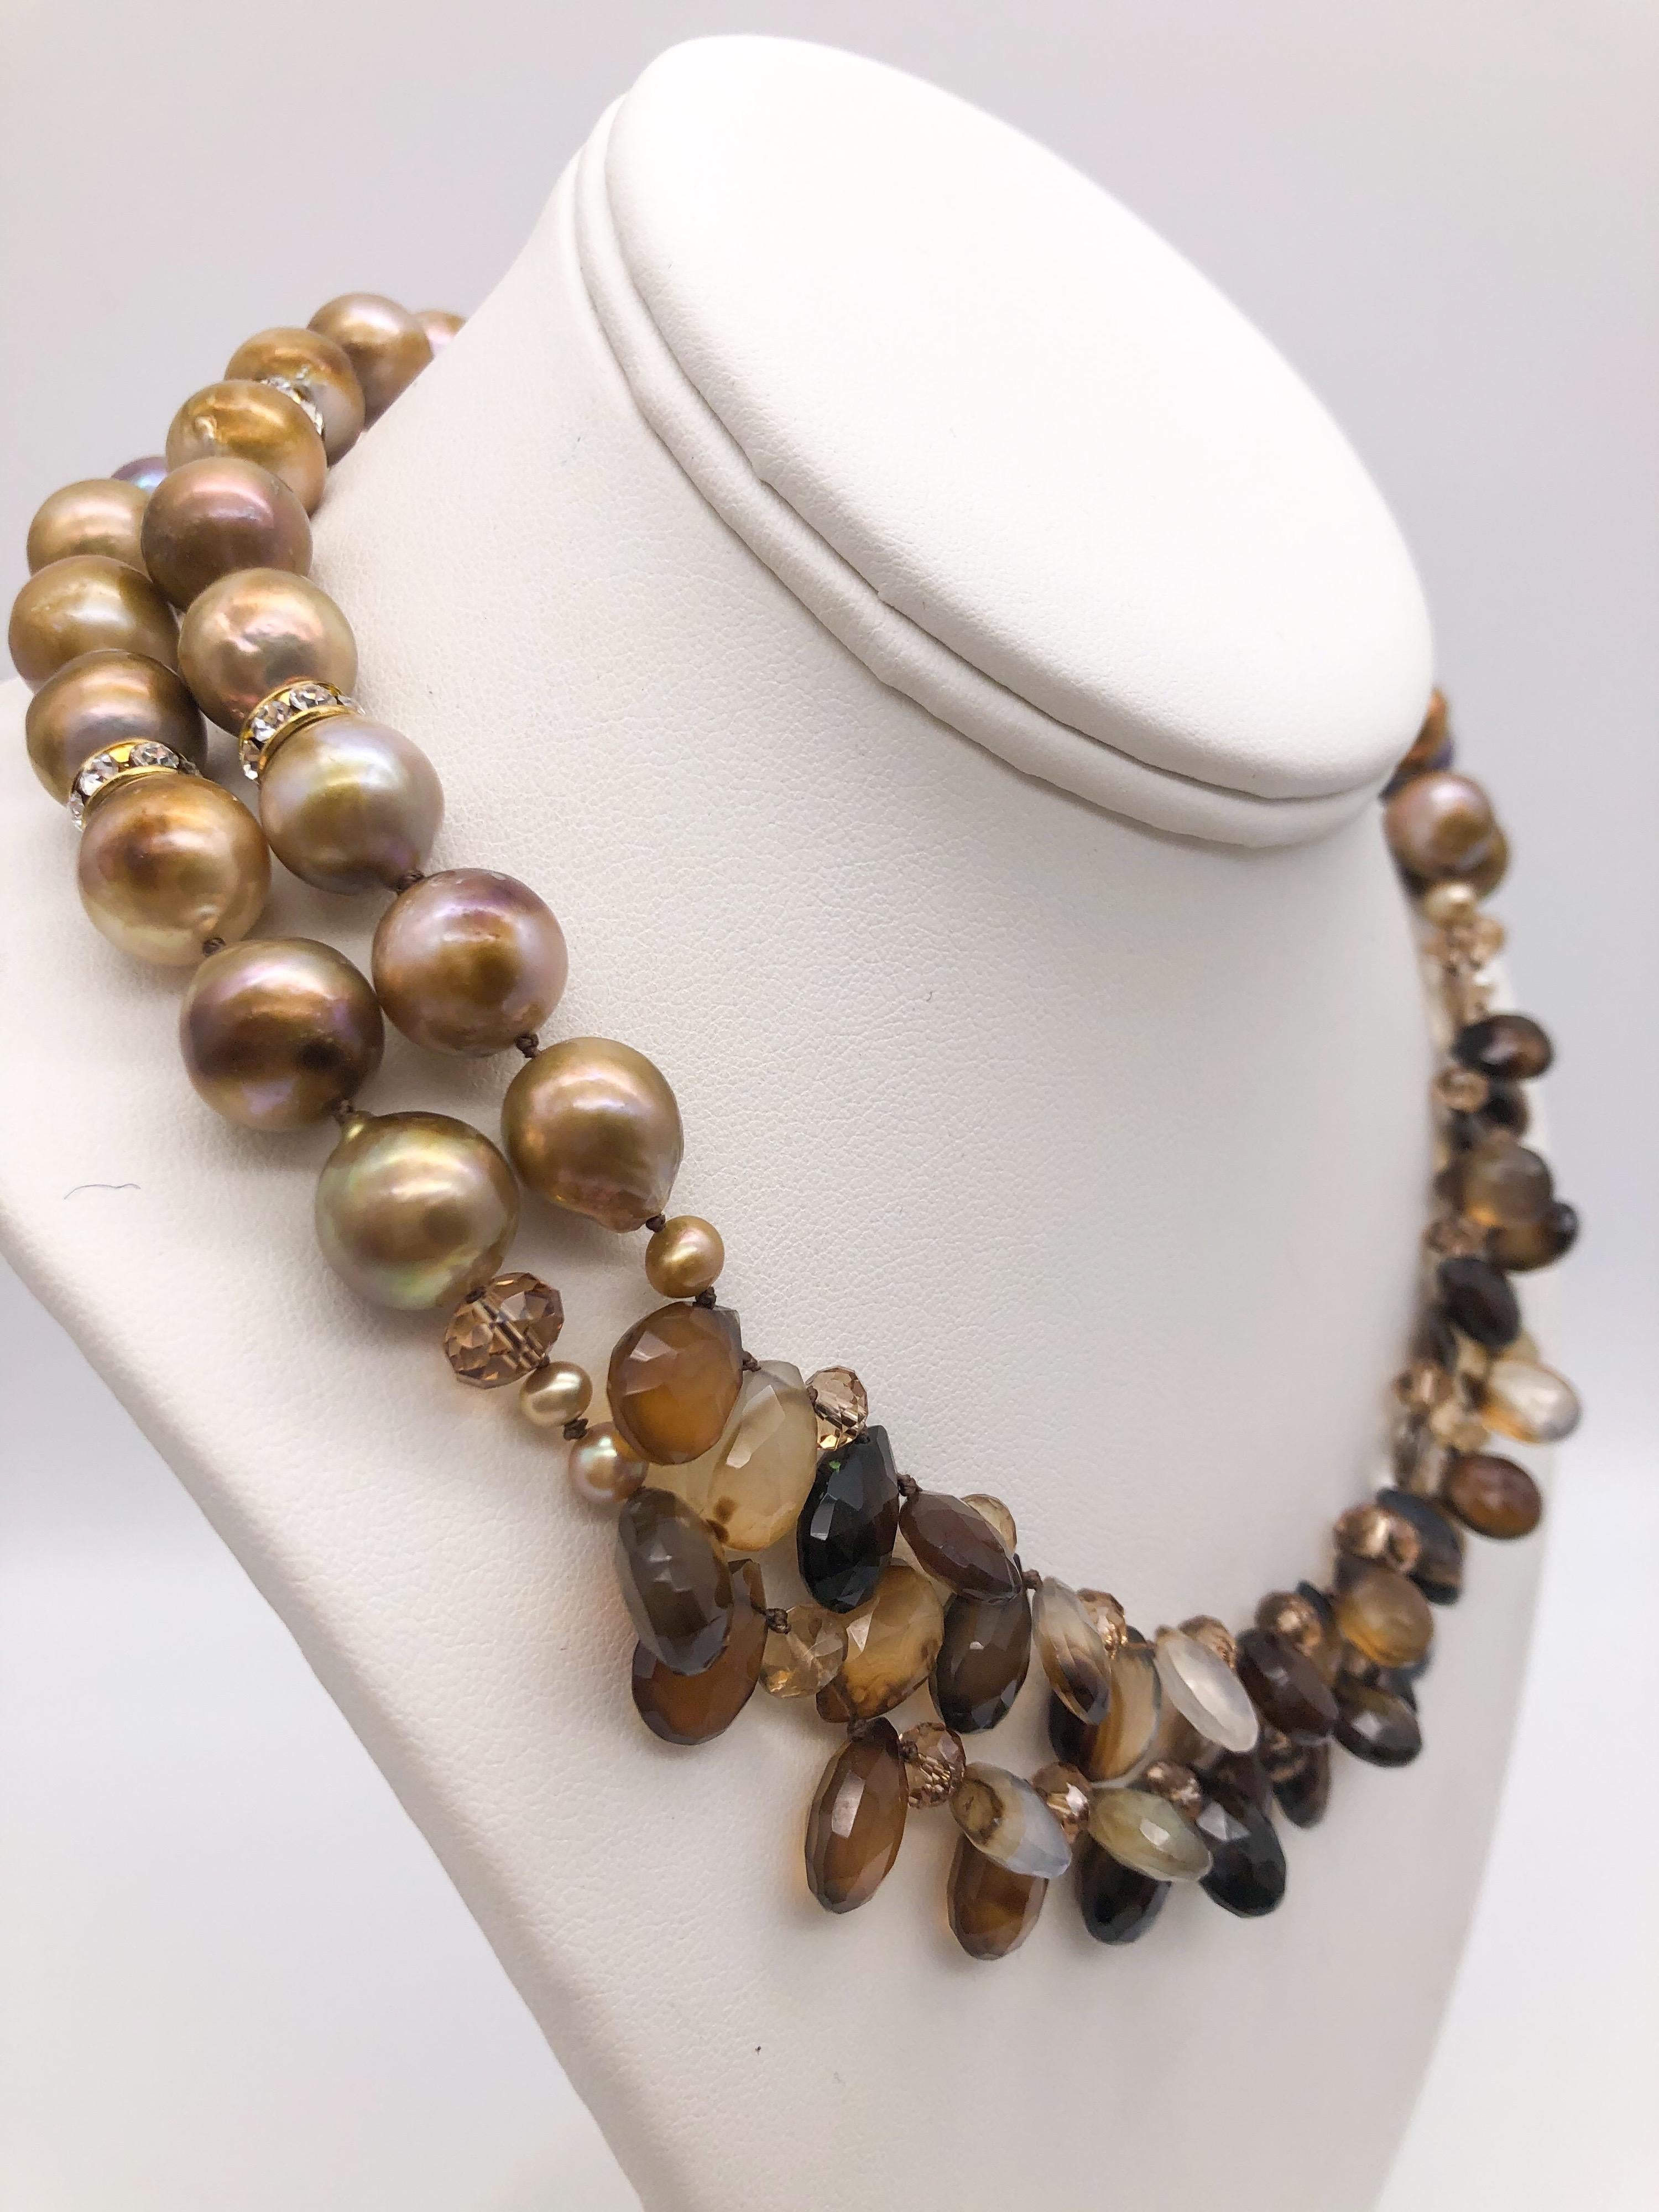 One-of-a-Kind
Translucent facetted Sardonyx tear-drop beads center 2 strands of 12mm gold Pearls. The clasp is a vermeil box mounting a Swarovski Crystal.
Silk hand-knotted
Approx: 18 inch